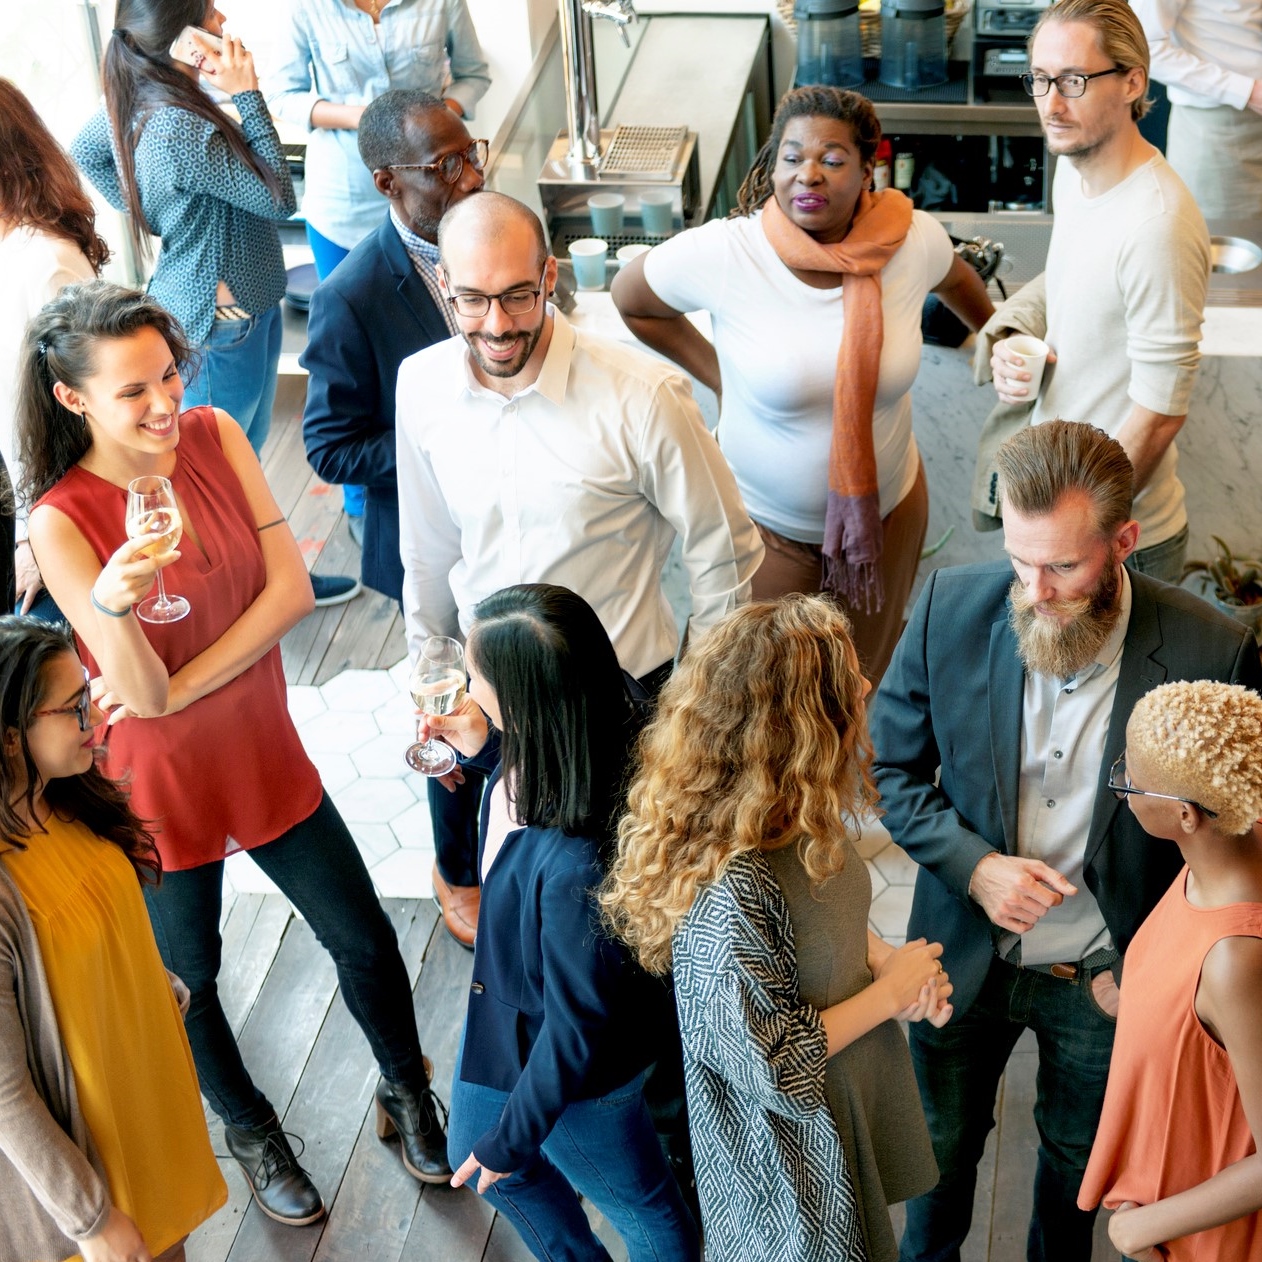 5-ways-to-prepare-for-a-networking-event-people-networking